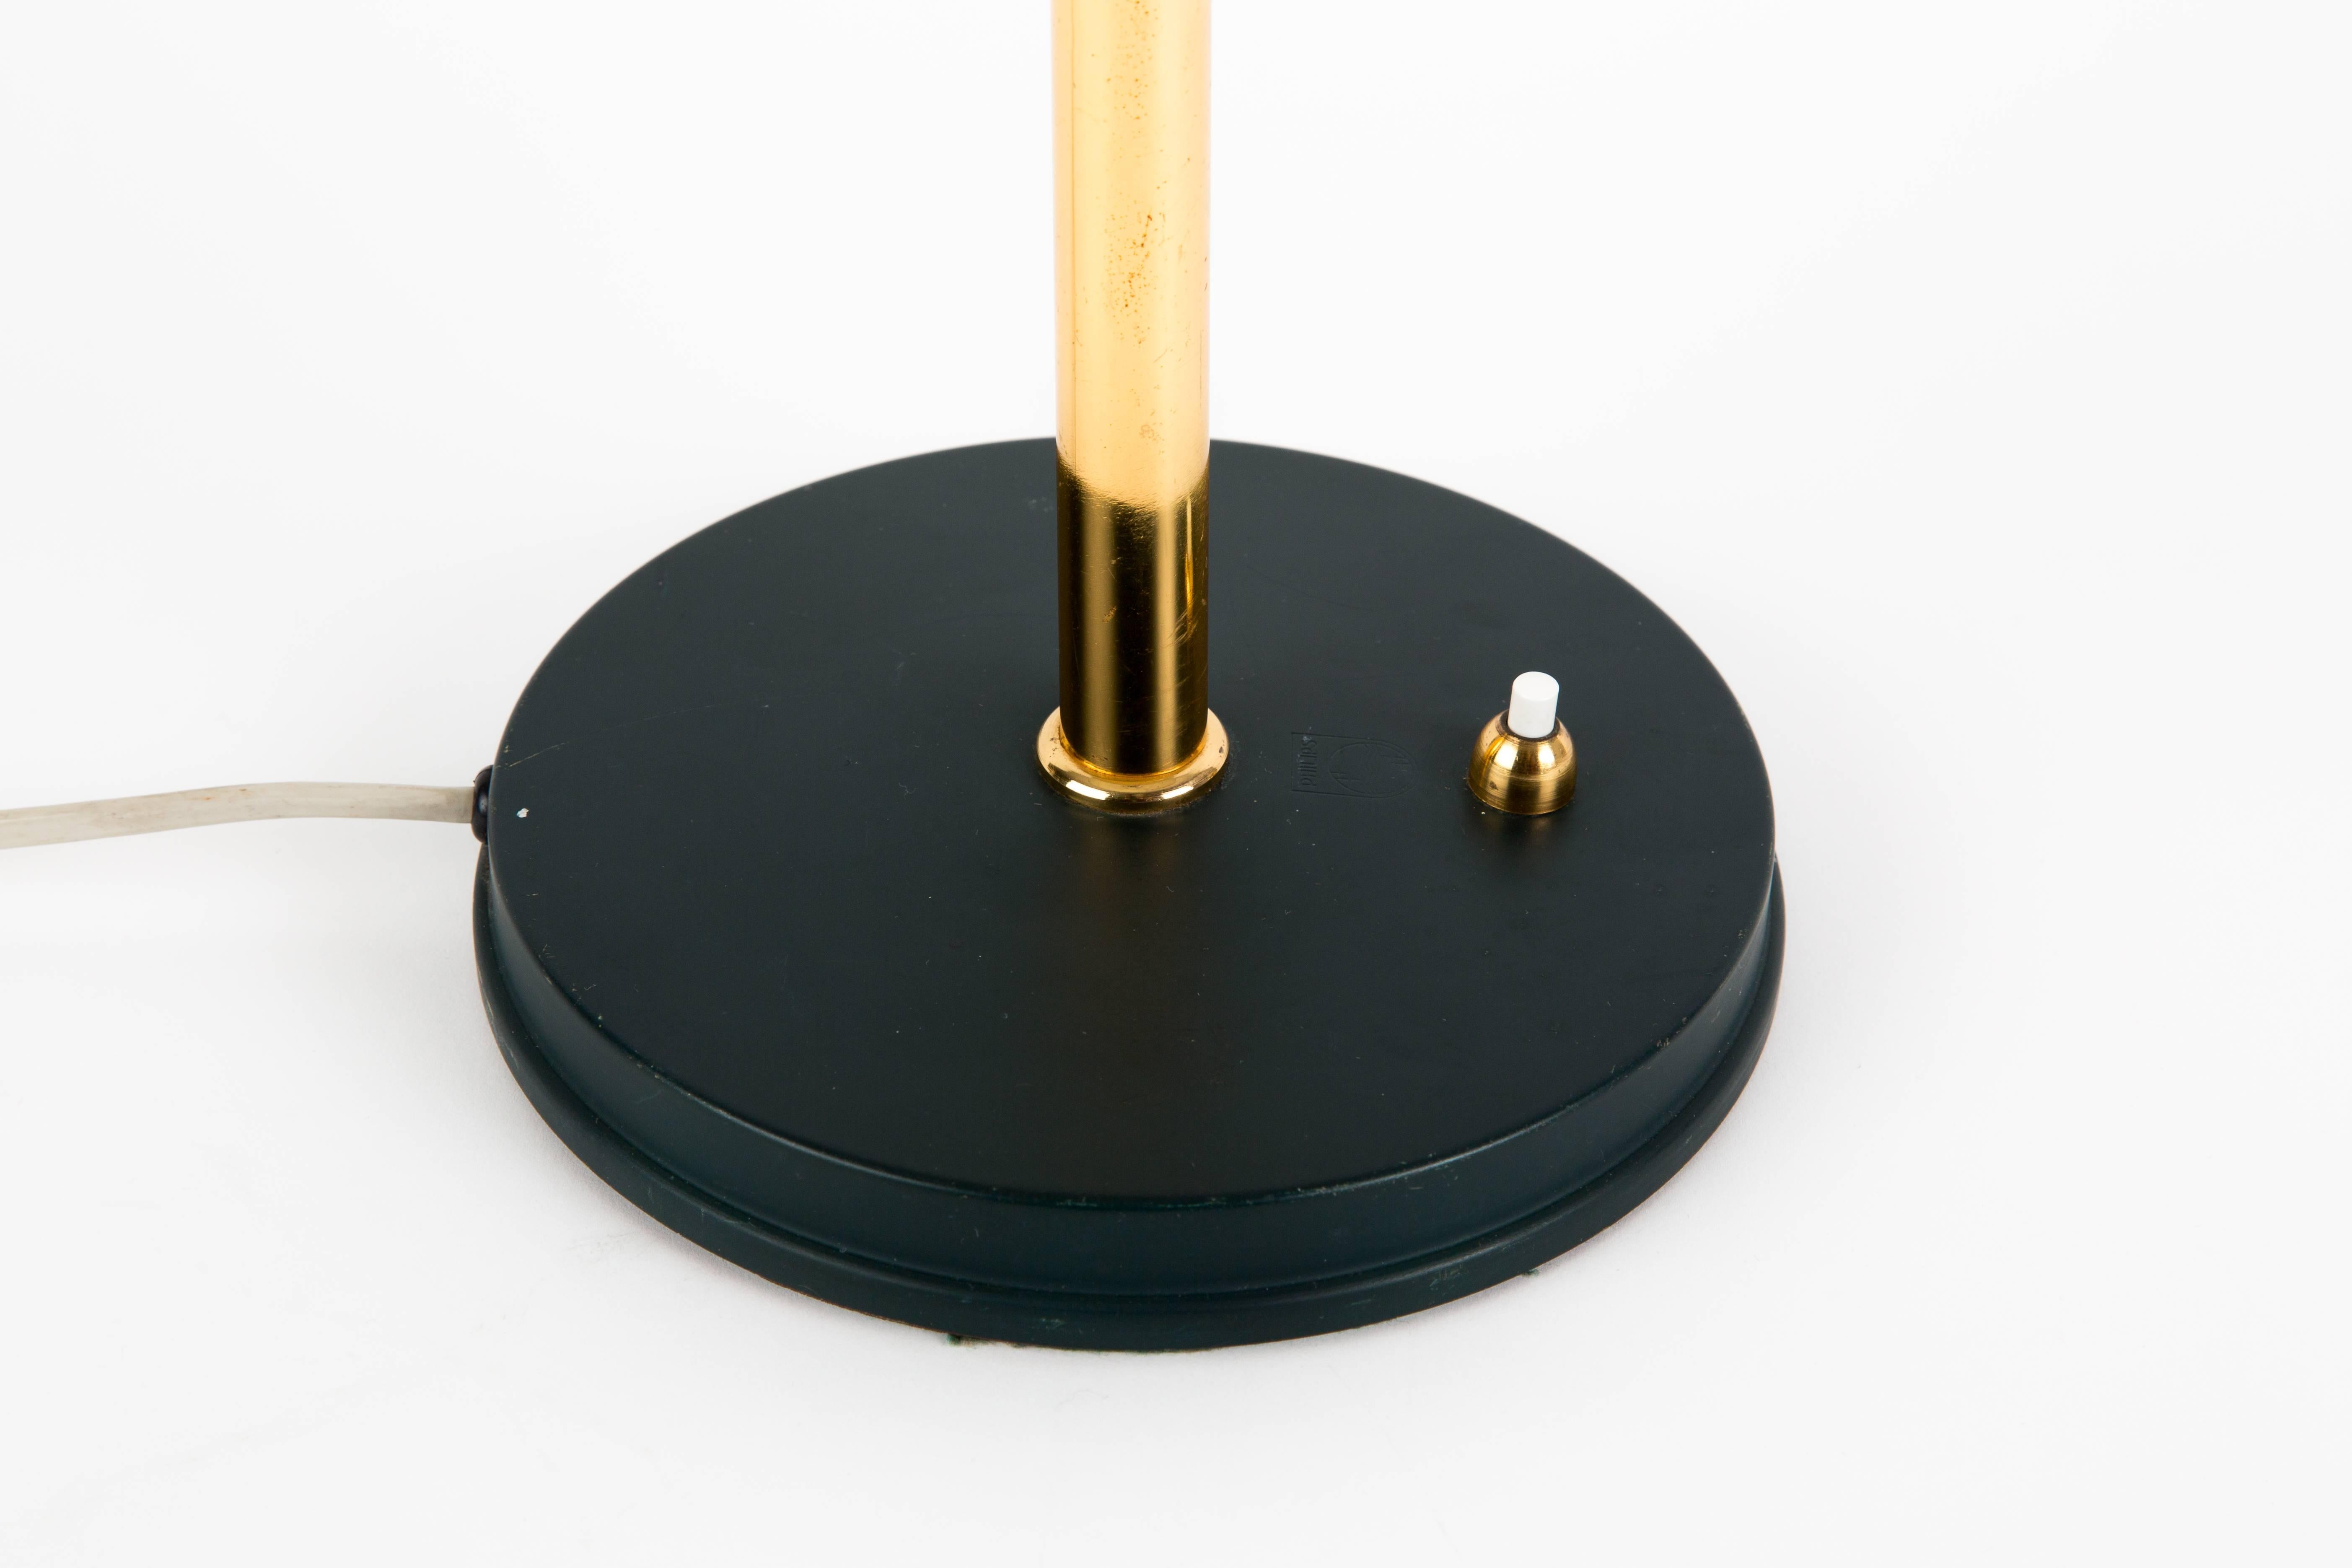 Table lamp designed by Louis Kalff for Philips. The dark green hat has a hole on the top. This is a lovely detail for the light effect. The standard is of brass. The switch is also with a brass ring, very nice eye catcher.